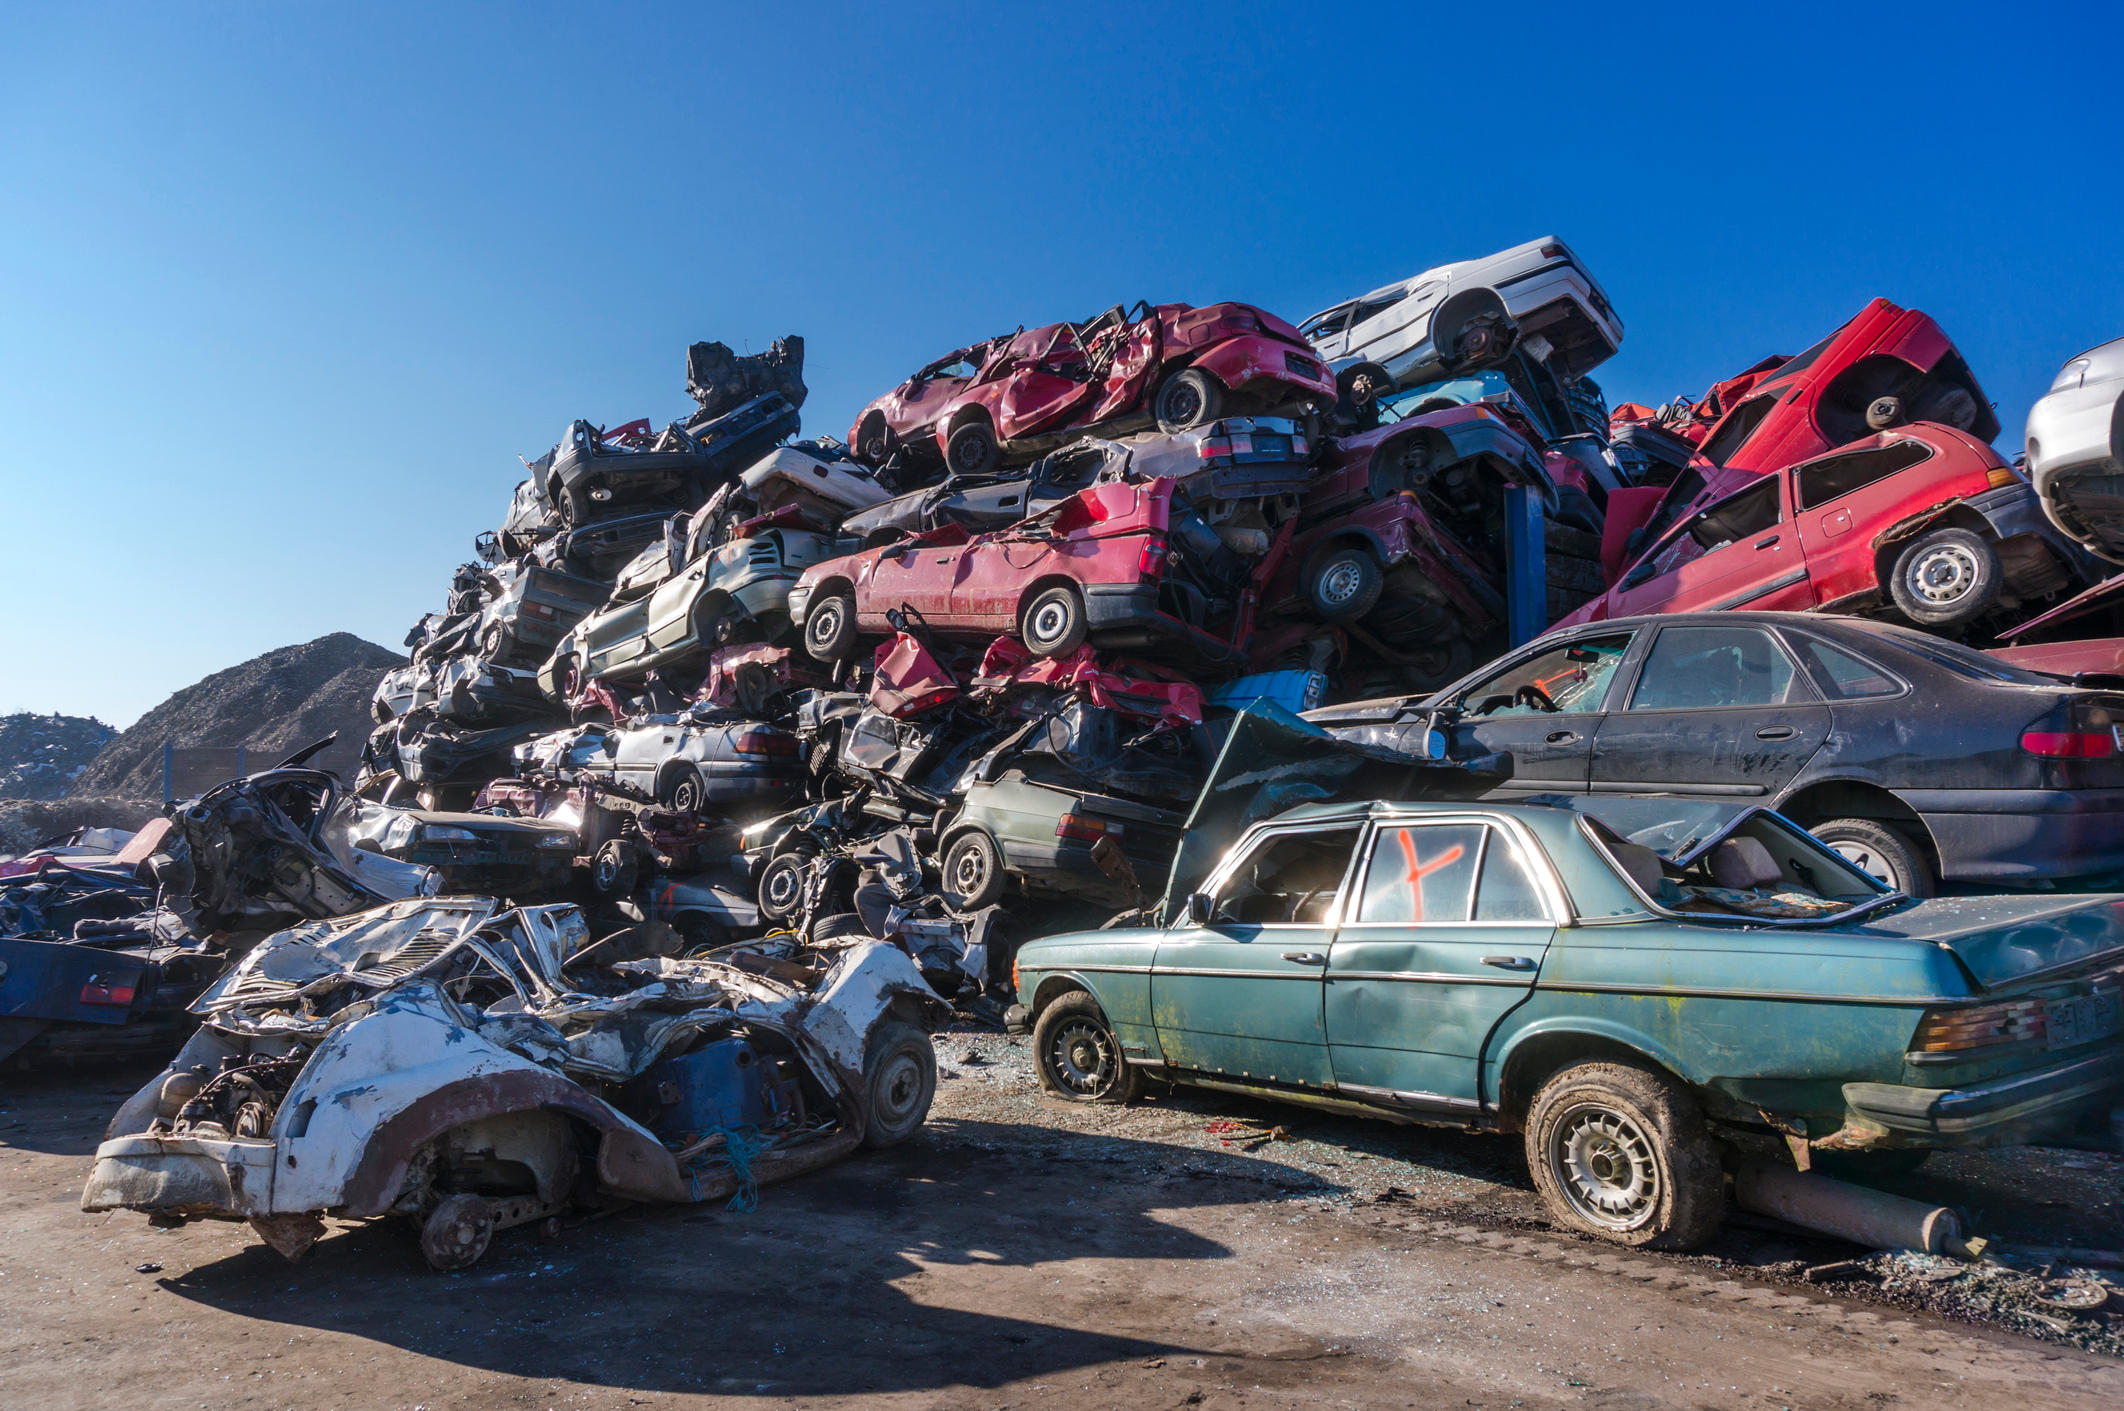 NYC Auto Recycling has many years of experience! Let us help you get rid of your cash car and we'll  NYC Auto Recycling Jamaica (929)220-2599